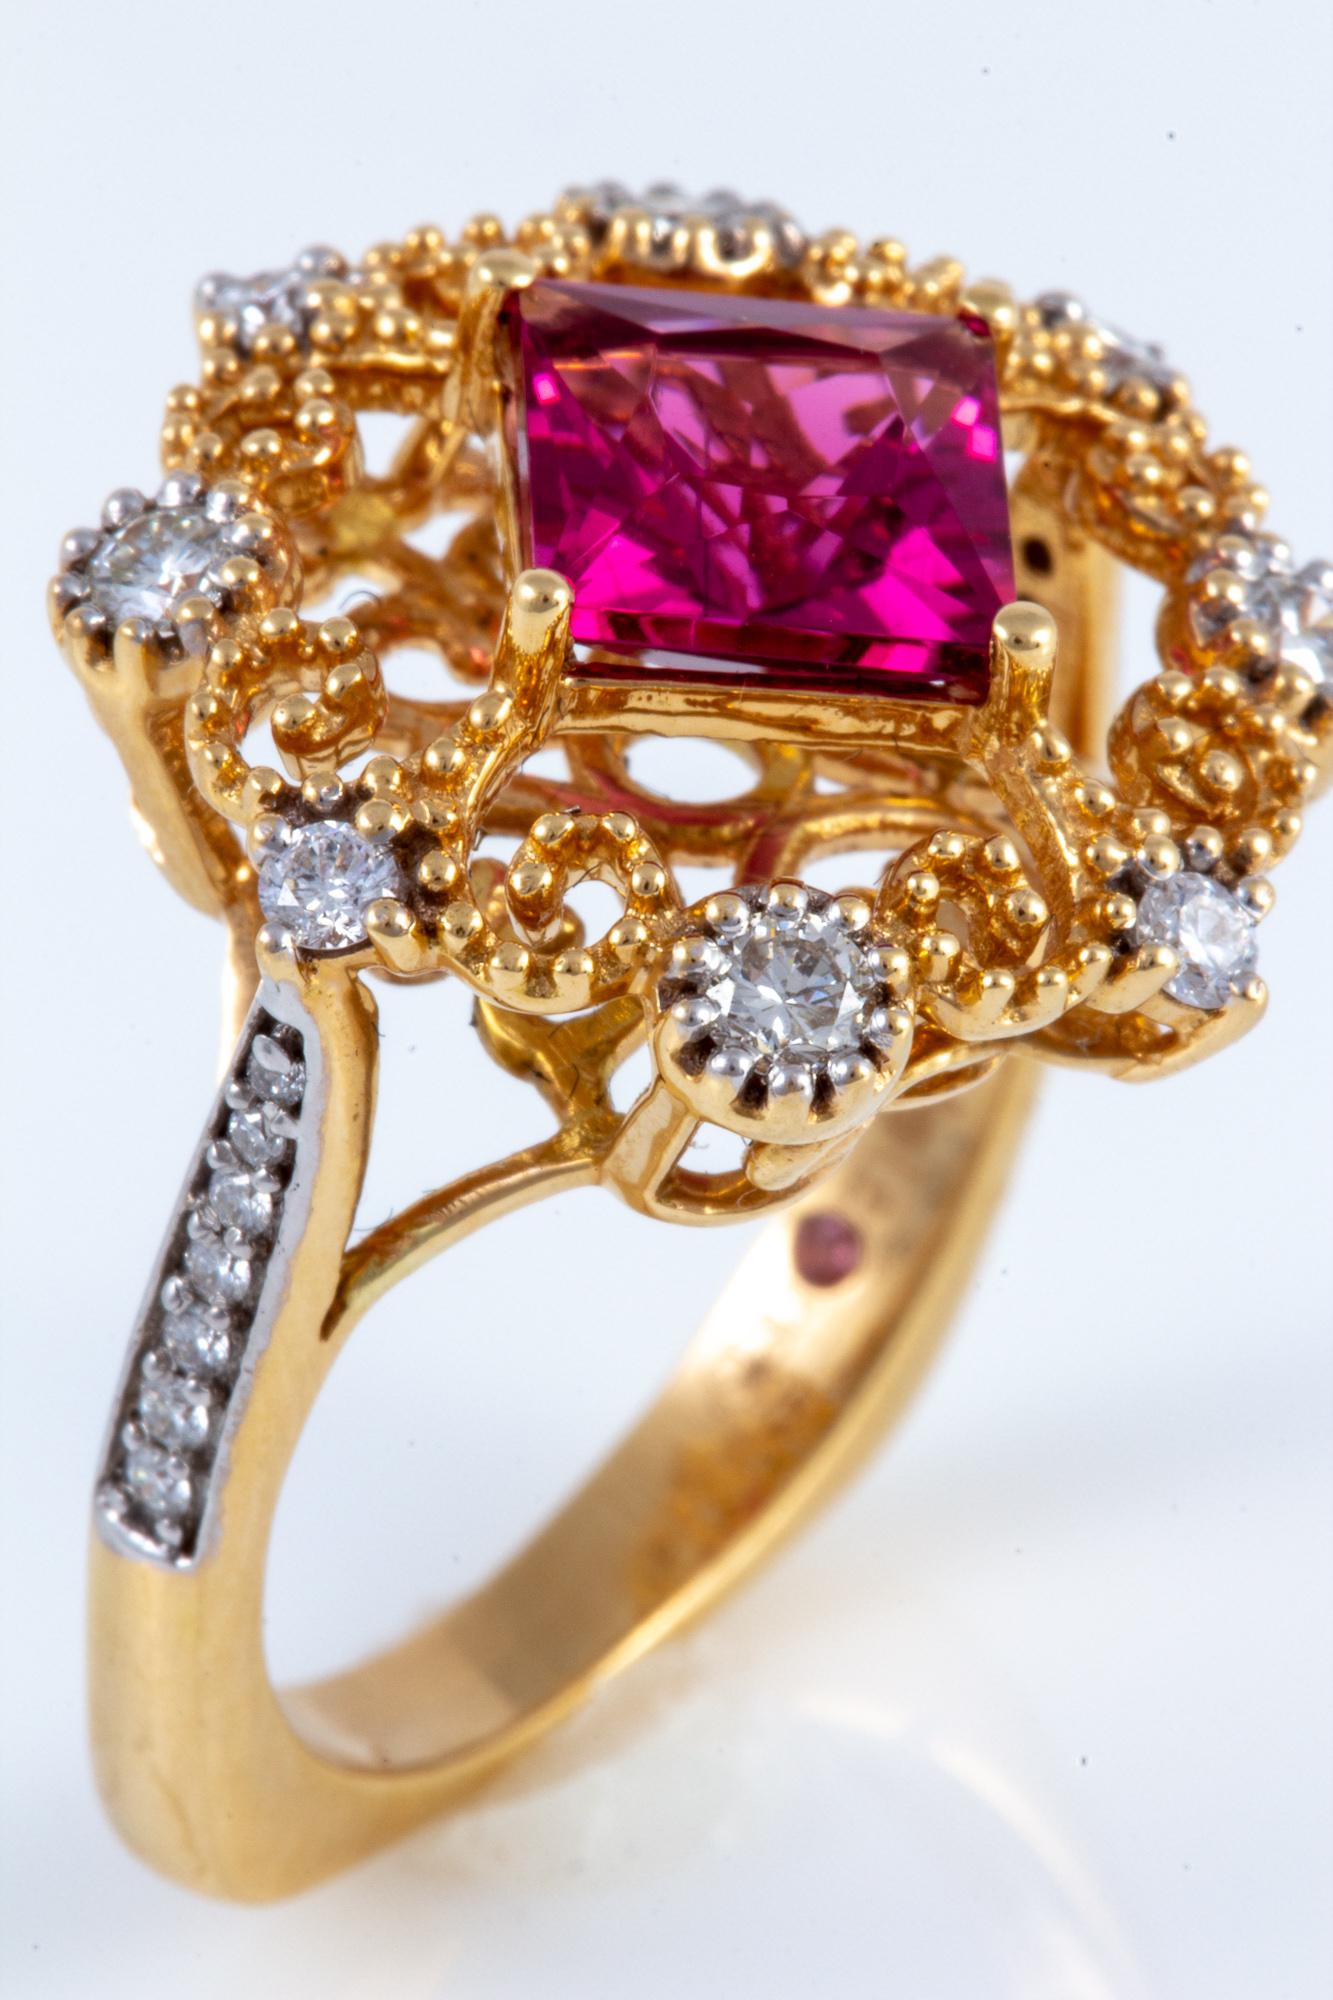 Rubellite Tourmaline and Diamond Ring set in 18 kt Gold For Sale 4